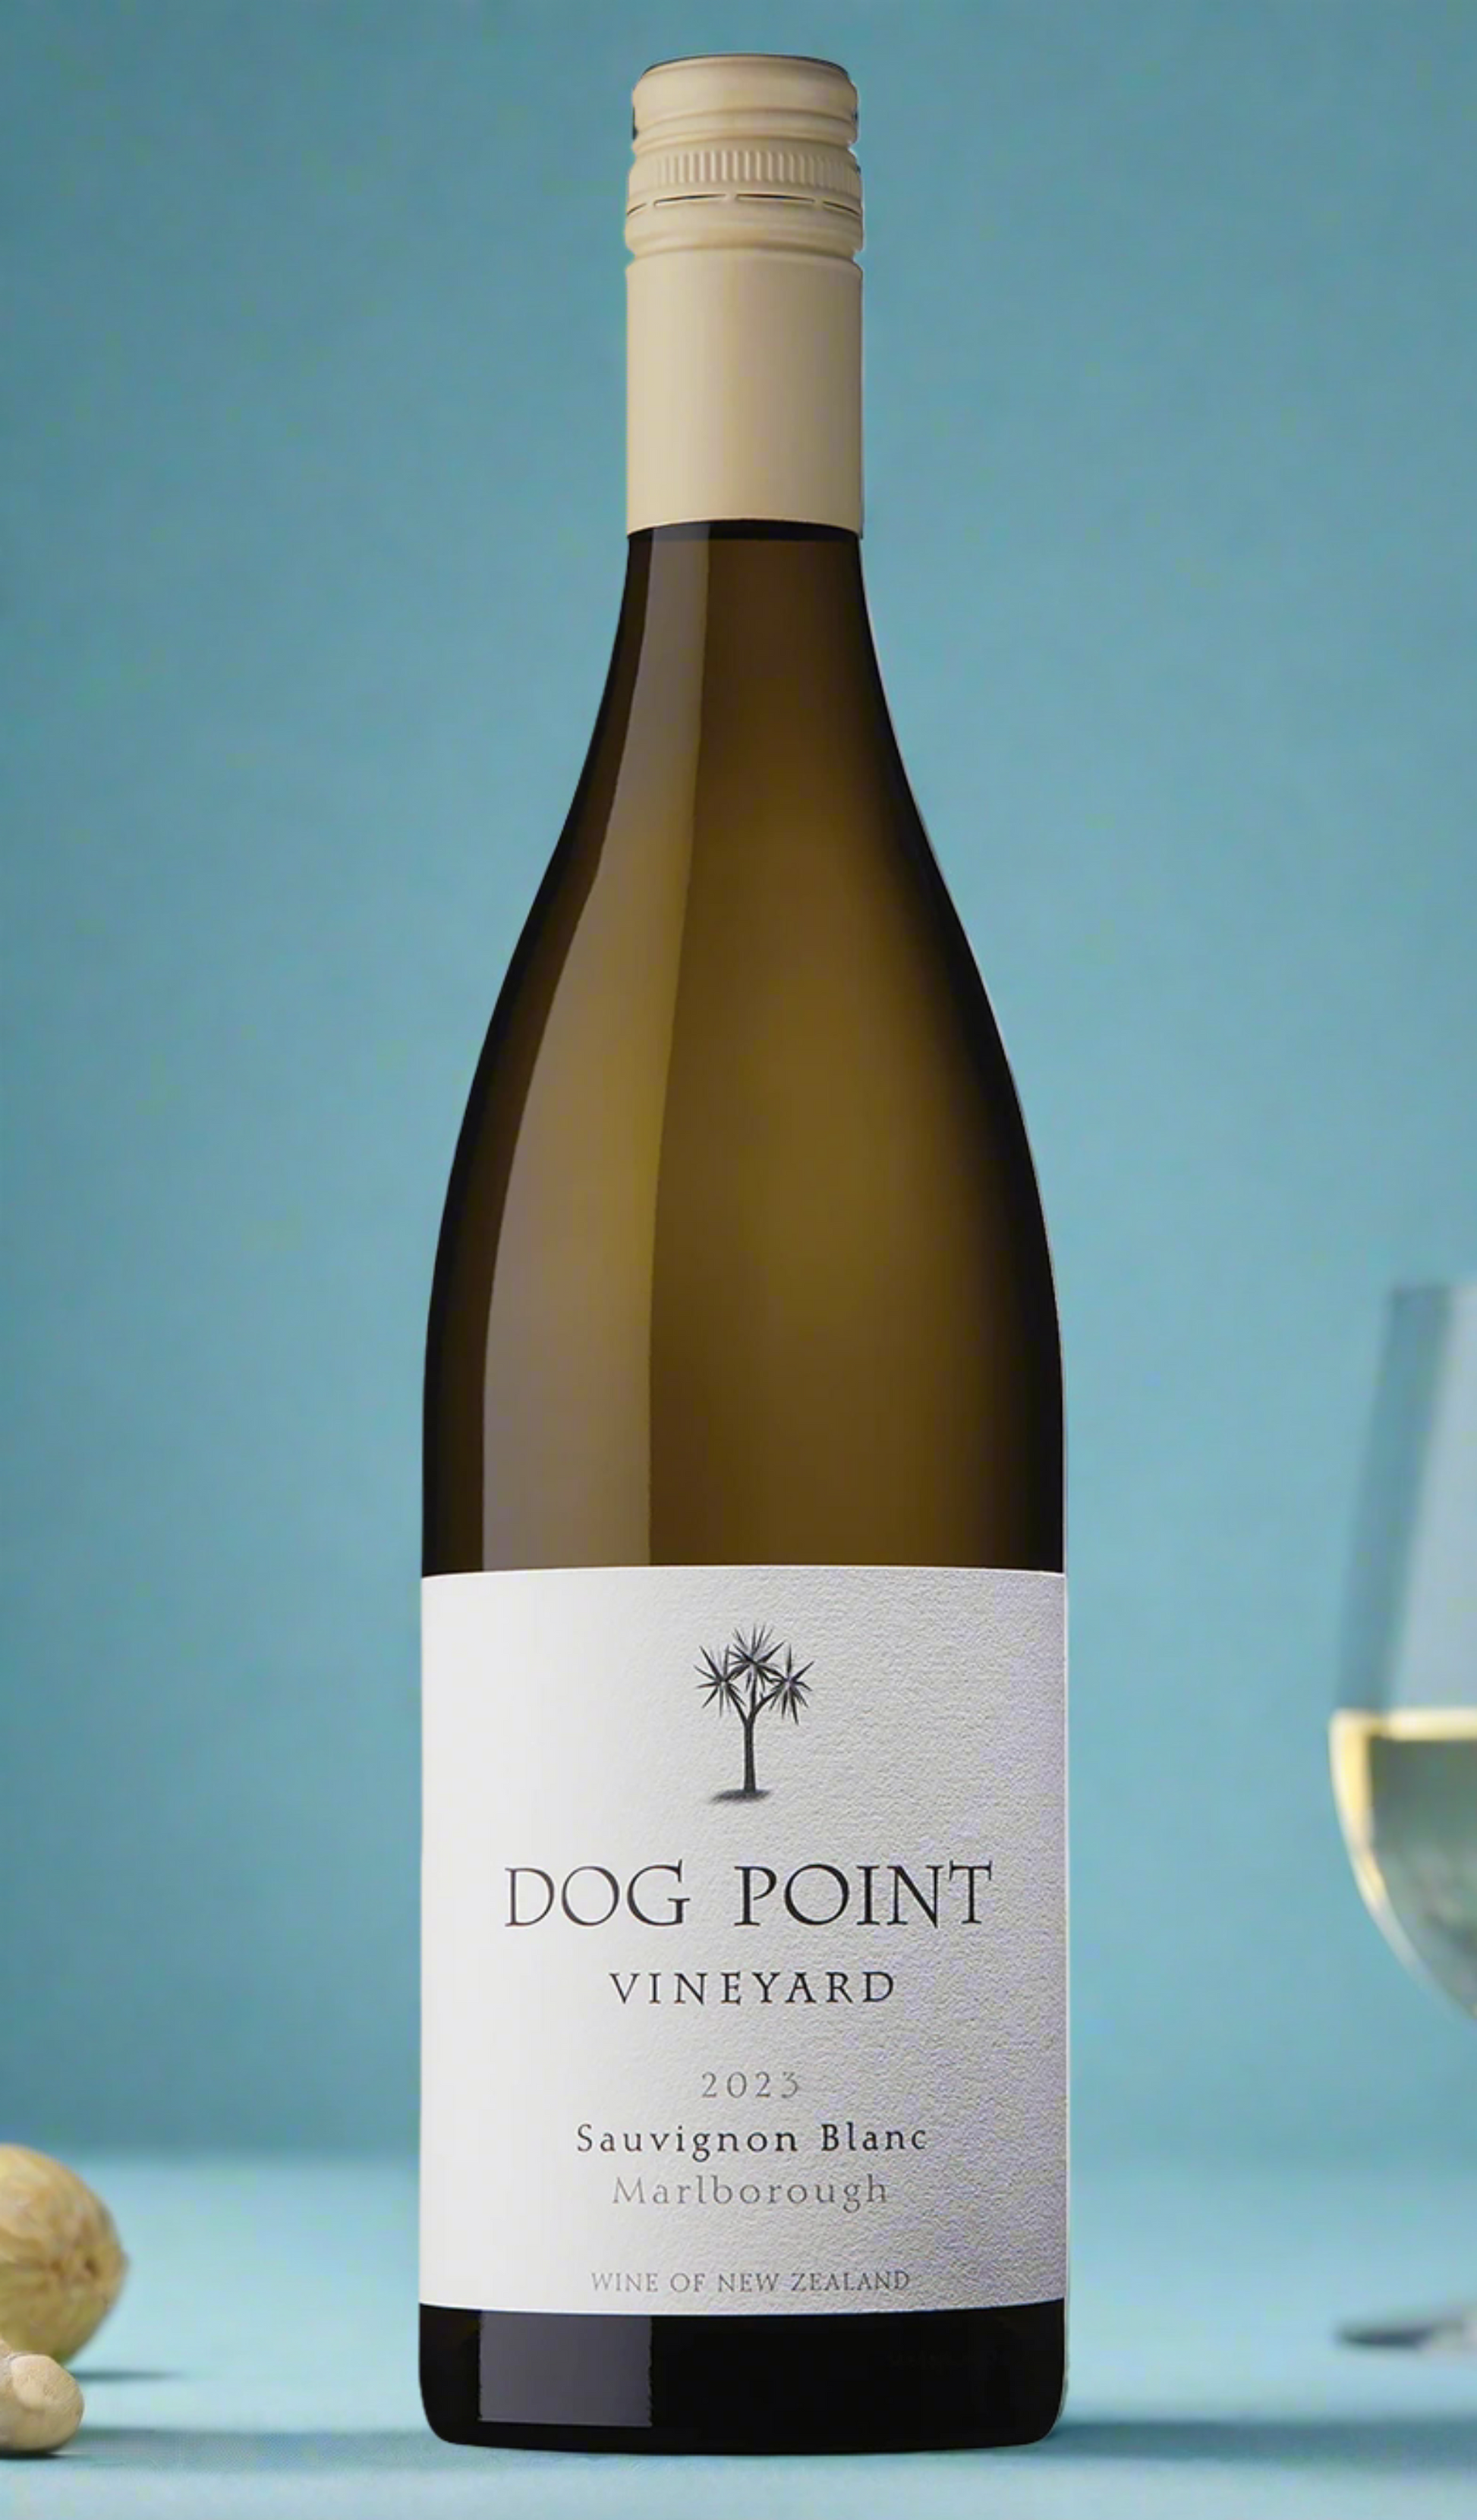 Find out more or buy Dog Point Sauvignon Blanc 2023 (Marlborough) online at Wine Sellers Direct - Australia’s independent liquor specialists.